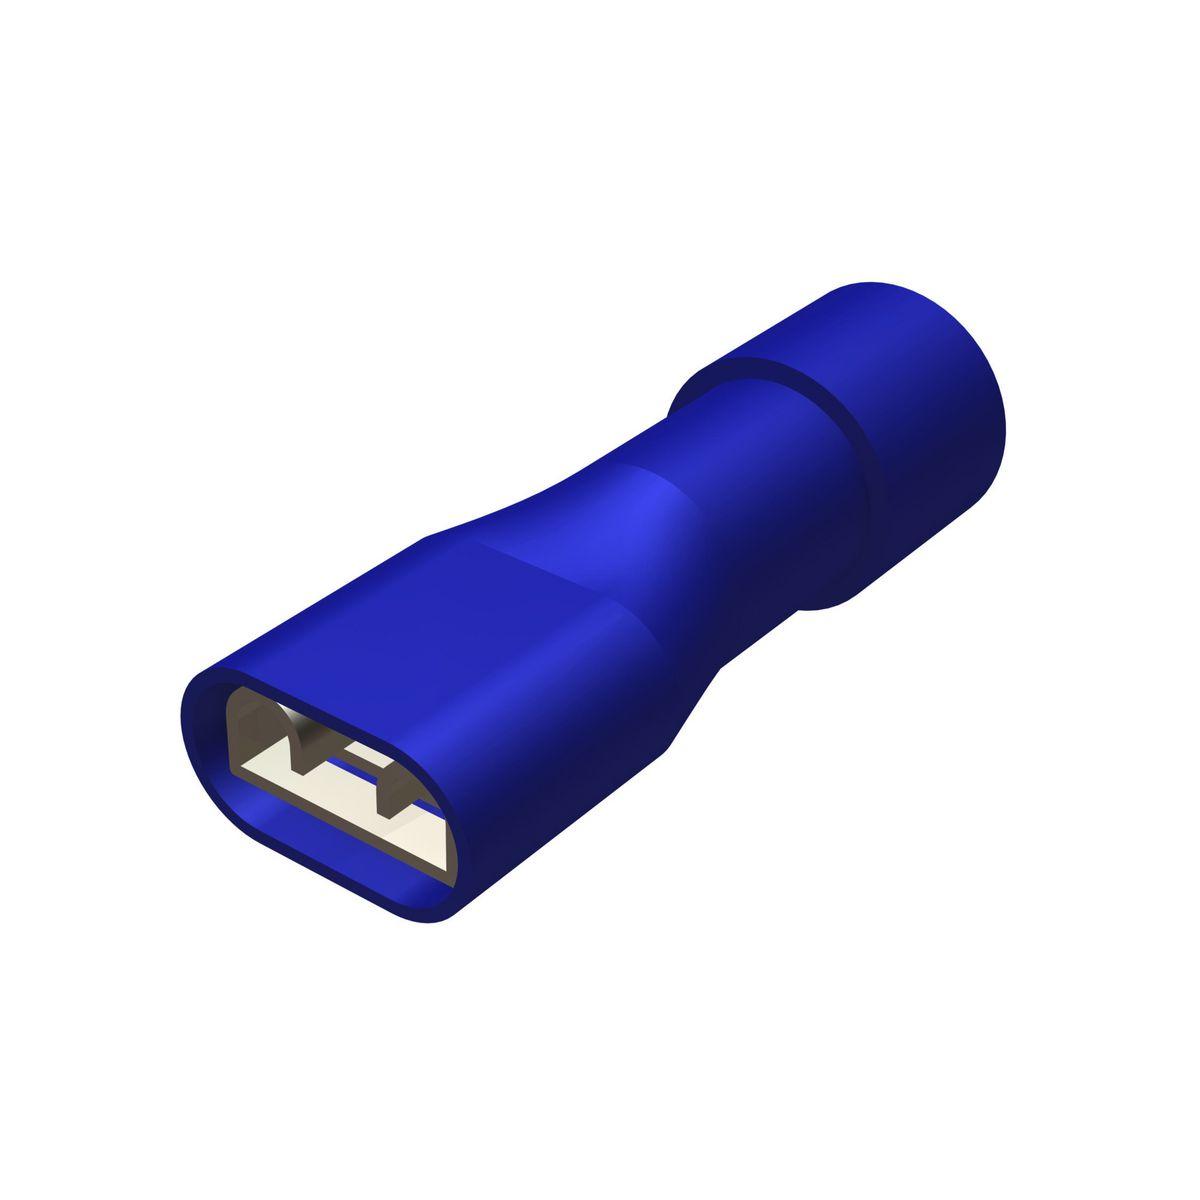 Hubbell FQN14F25X03D Brass Fully Insul Female Quick Disconnects, Funnel Entry, 14-16 AWG, 300 V, 0.90" L, 0.25" W, Nylon Insul, Blue(Insul Color).  ; Features: Fully Insulated Connectors: Eliminate The Need For Post Installation Insulation, Funnel Entry Barrel Opening: Assure